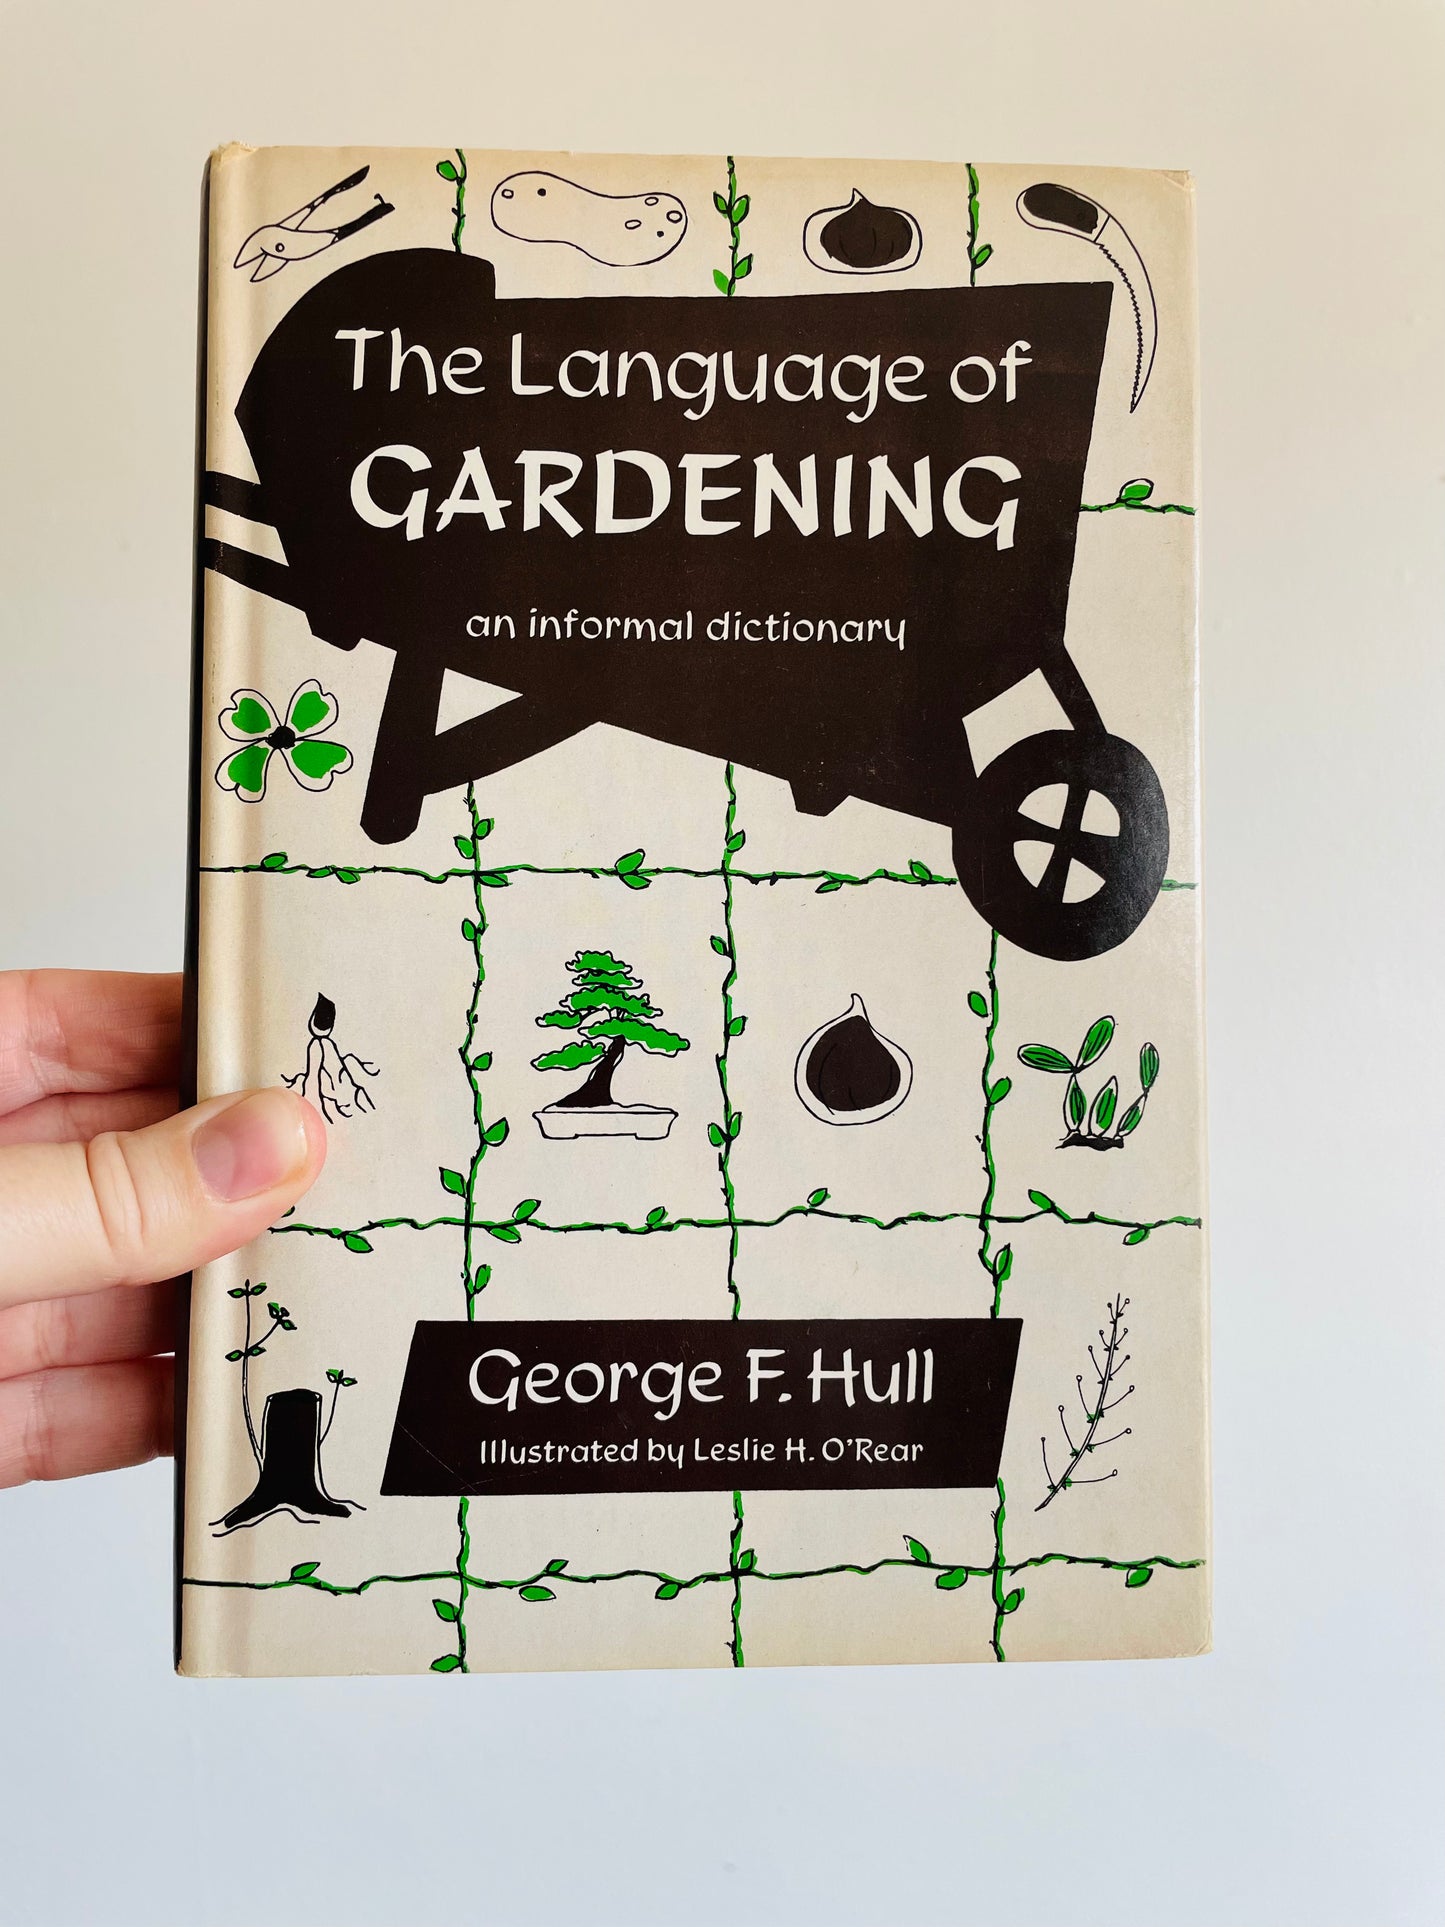 The Language of Gardening by George F. Hull (1967) - Hardcover Illustrated Book